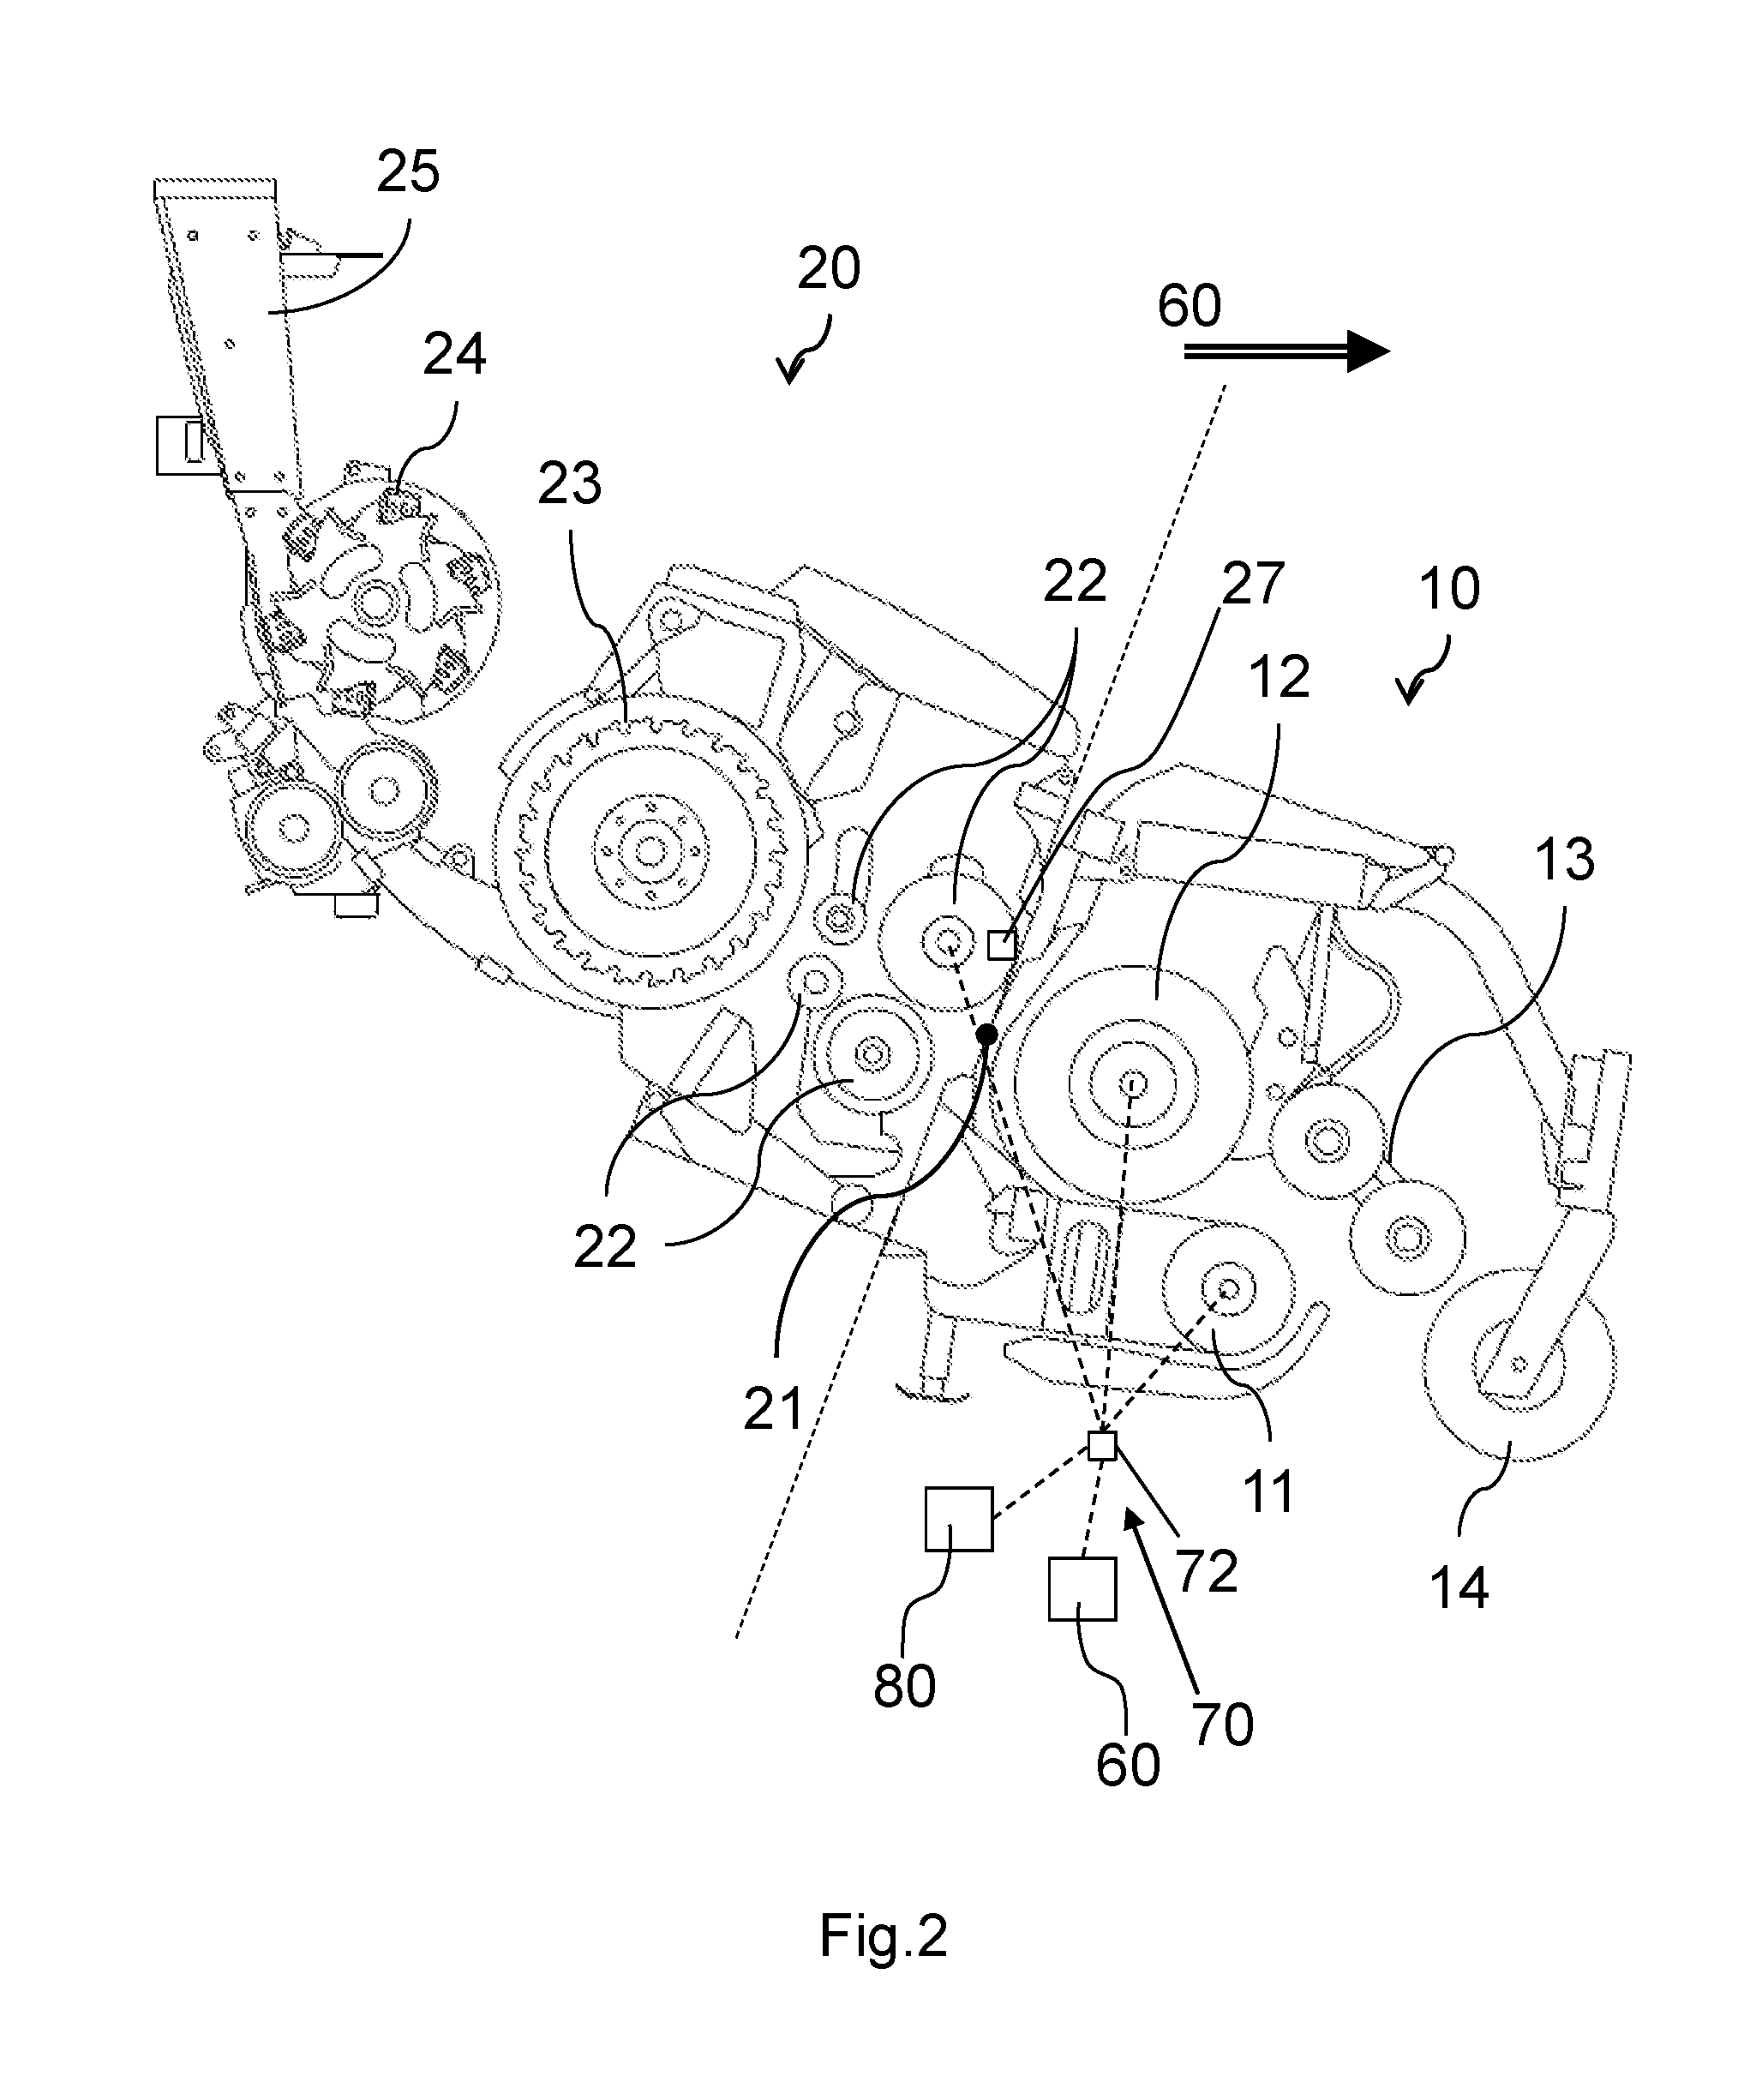 Crop Pick-Up, Agricultural Equipment and Method of Ejecting a Foreign Object